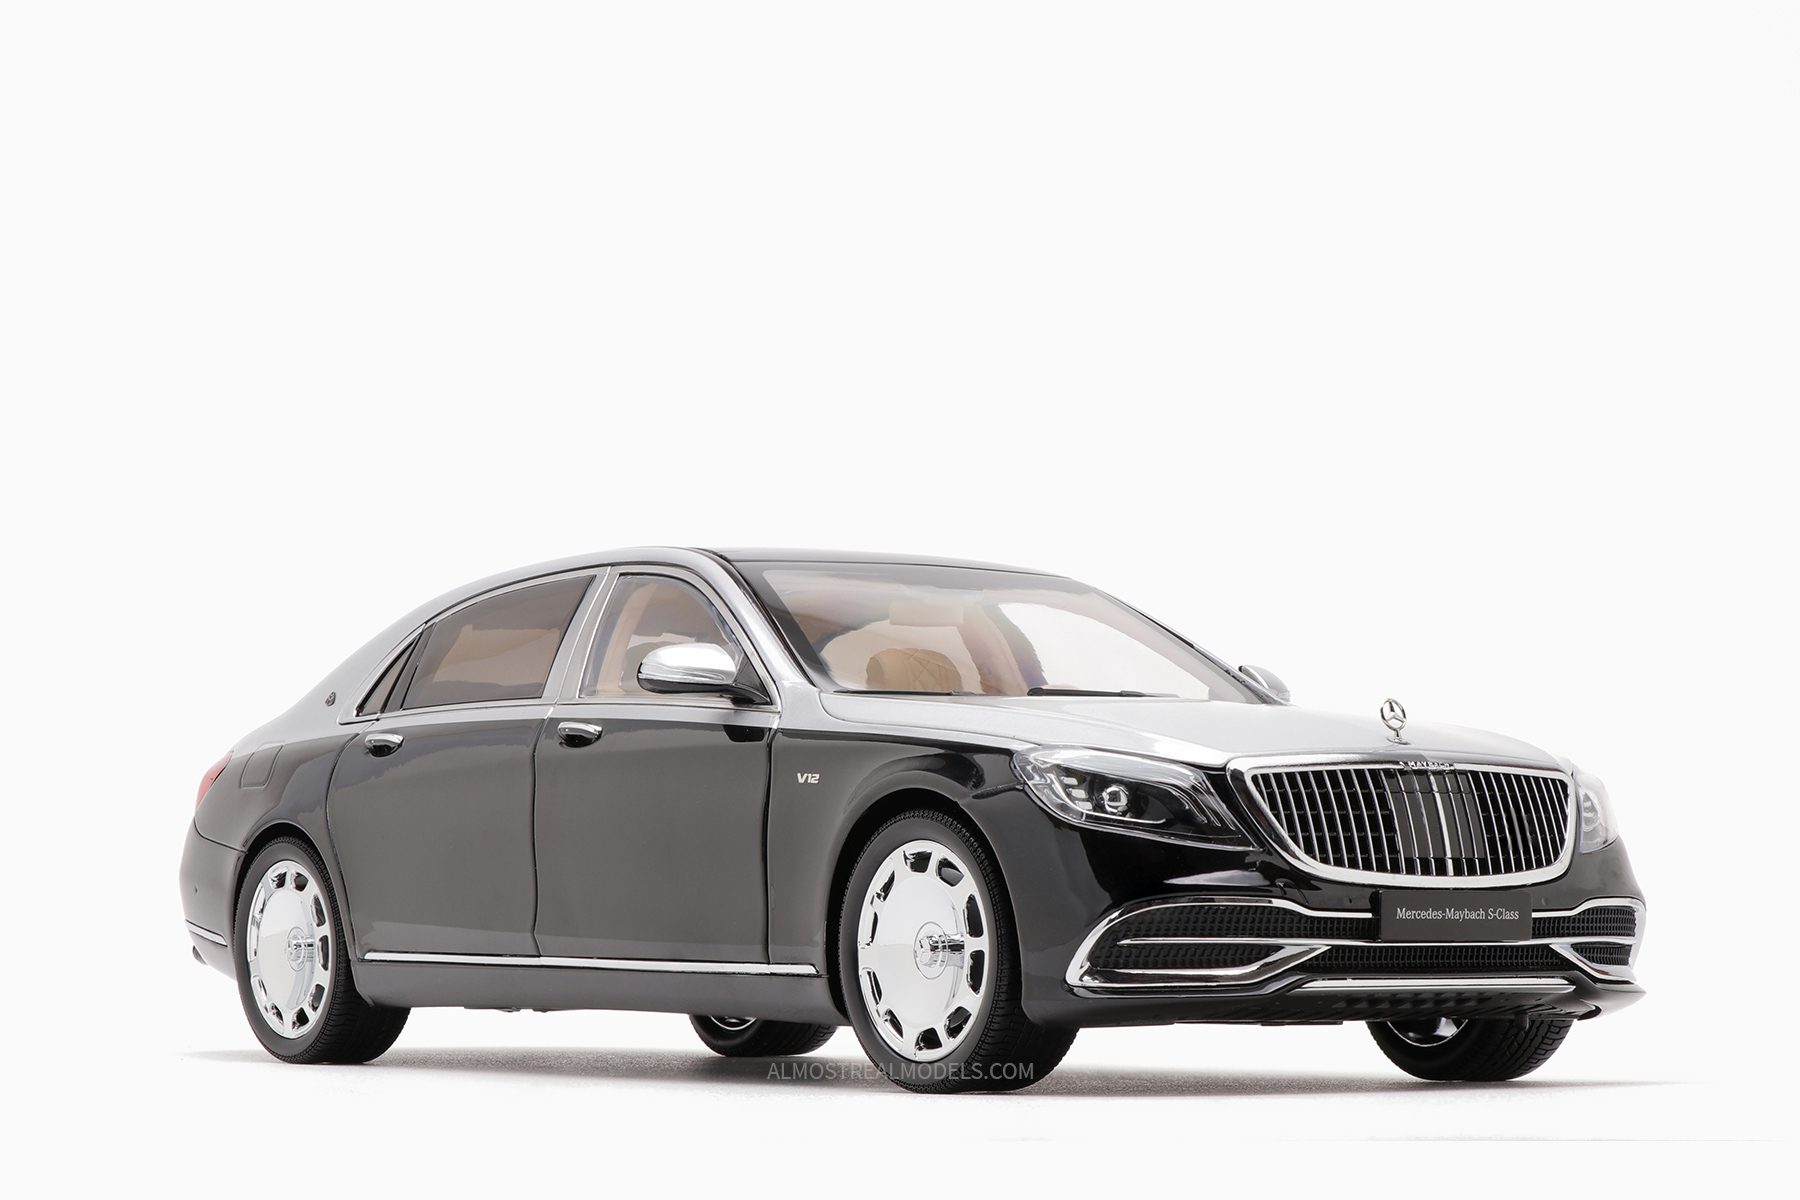 Mercedes-Maybach S-class 2019 SIlver Black 1:18 Almost Real